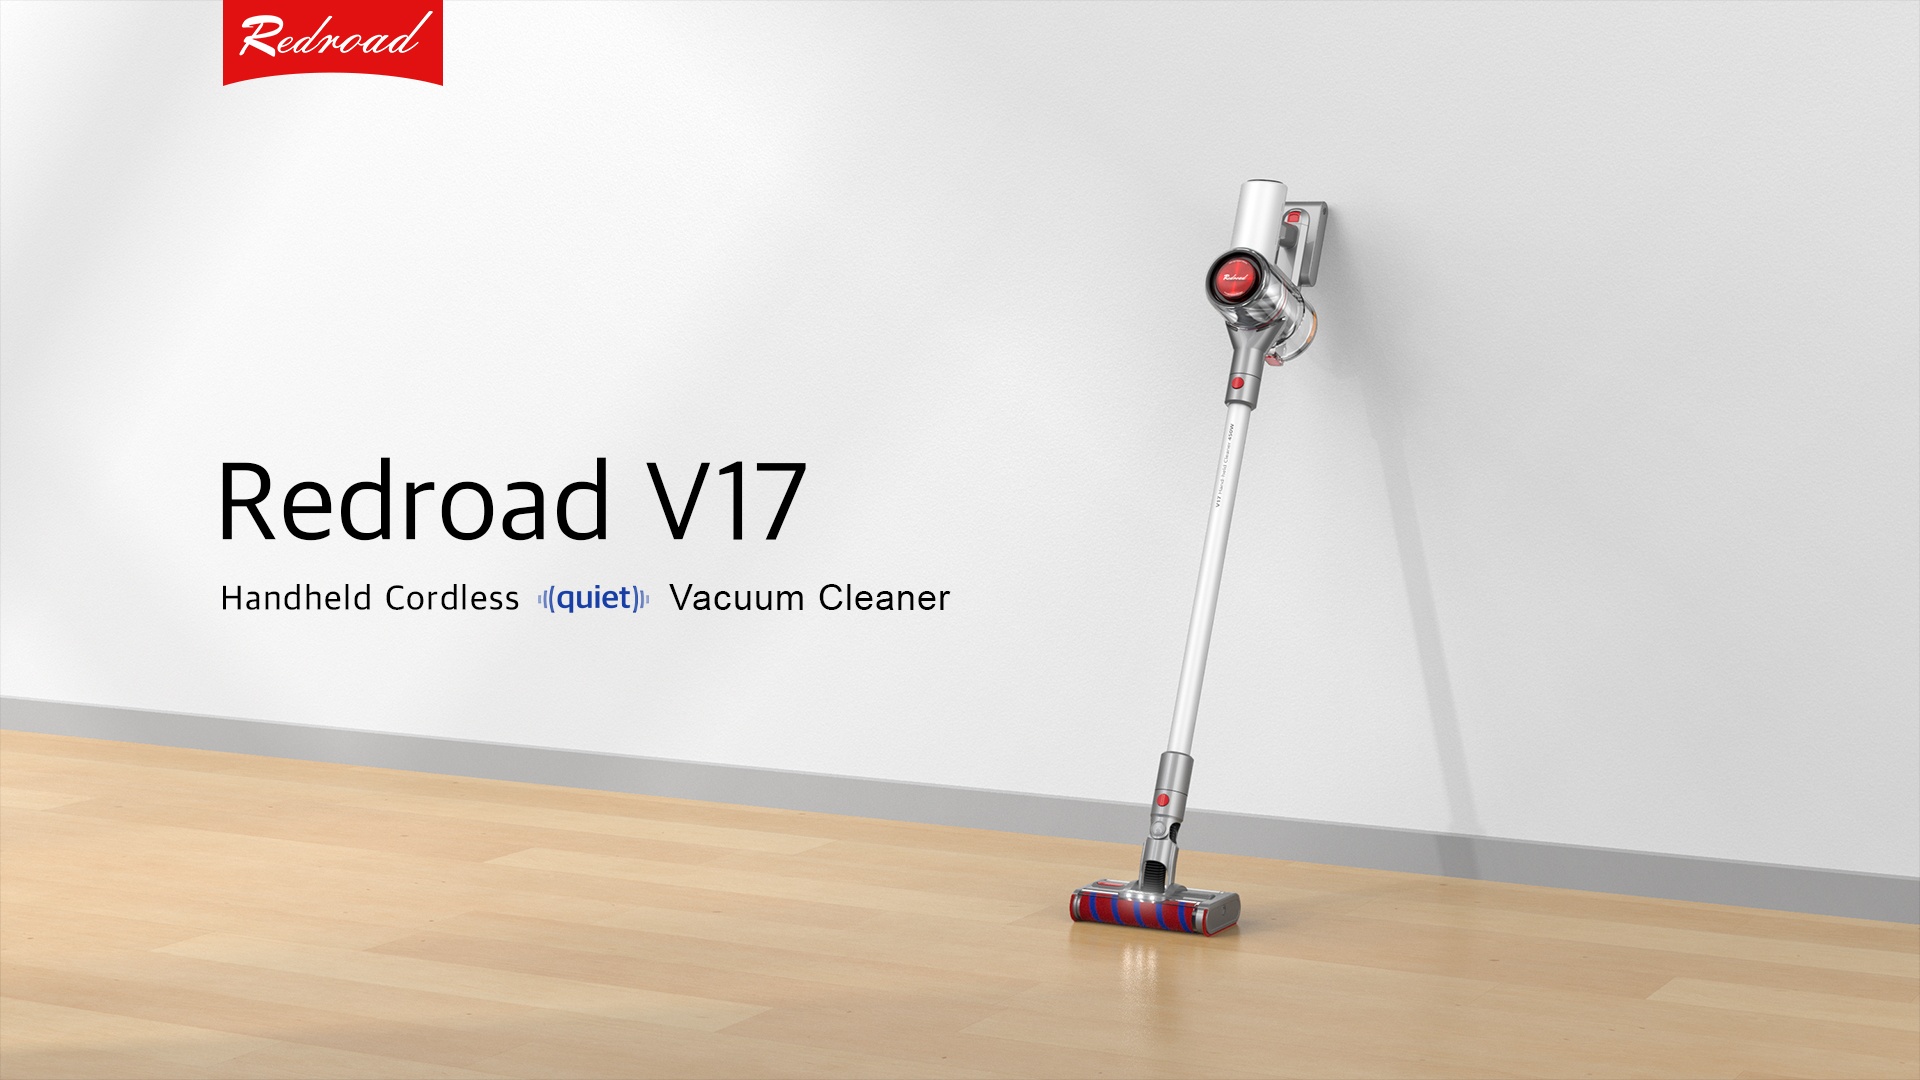 Redroad V17: An Affordable, Easy-to-Use, Cordless Vacuum Cleaner